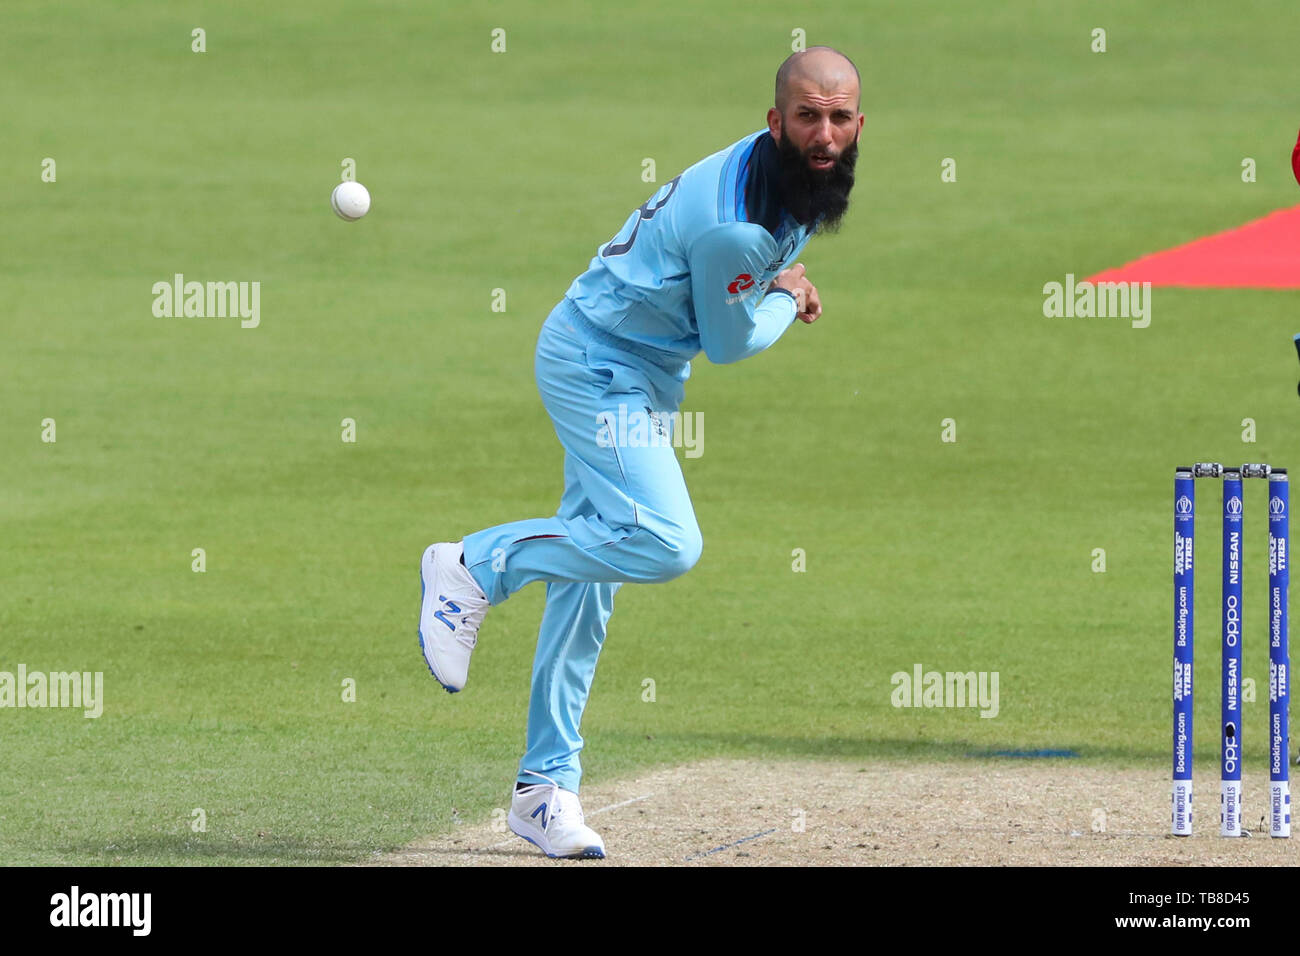 LONDON, ENGLAND. 30 MAY 2019: Moeen Ali of England bowls the ball during the England v South Africa, ICC Cricket World Cup match, at the Kia Oval, London, England. Credit: Cal Sport Media/Alamy Live News Stock Photo